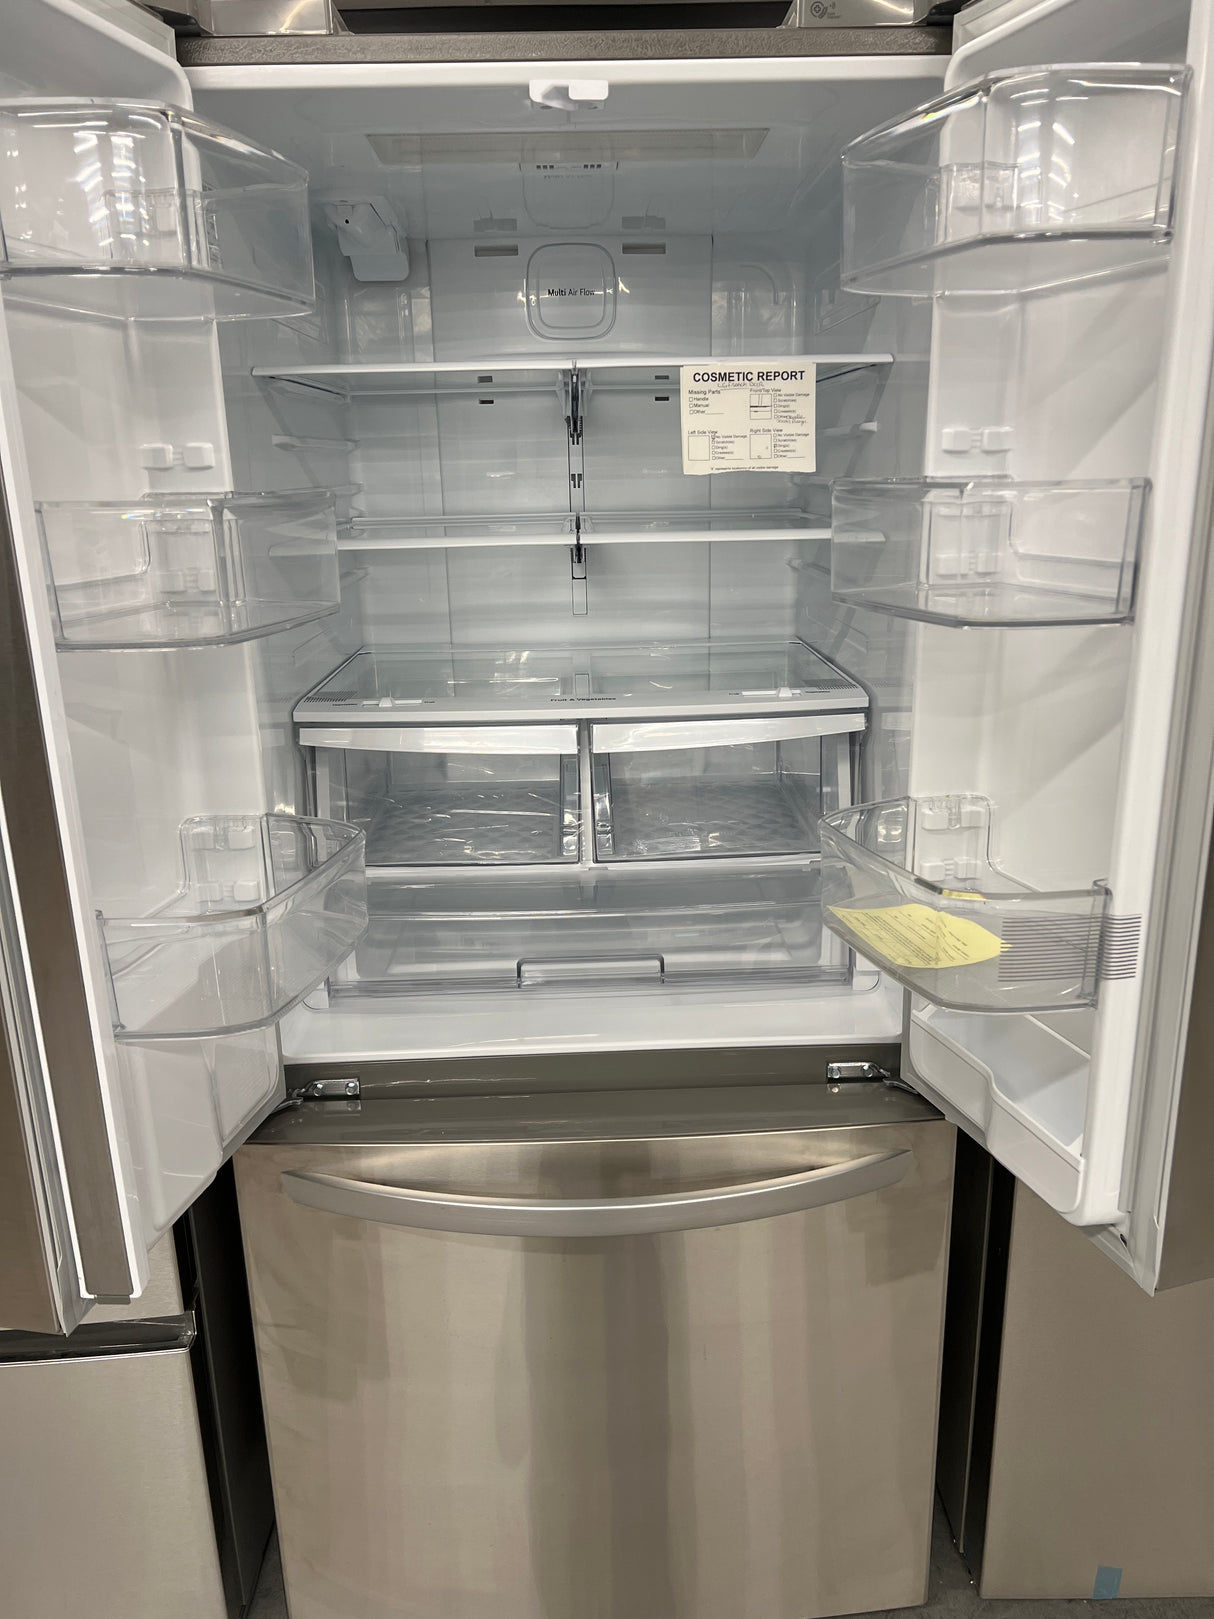 LFDS22520S LG 21.8 ft.³ stainless steel French door refrigerator.